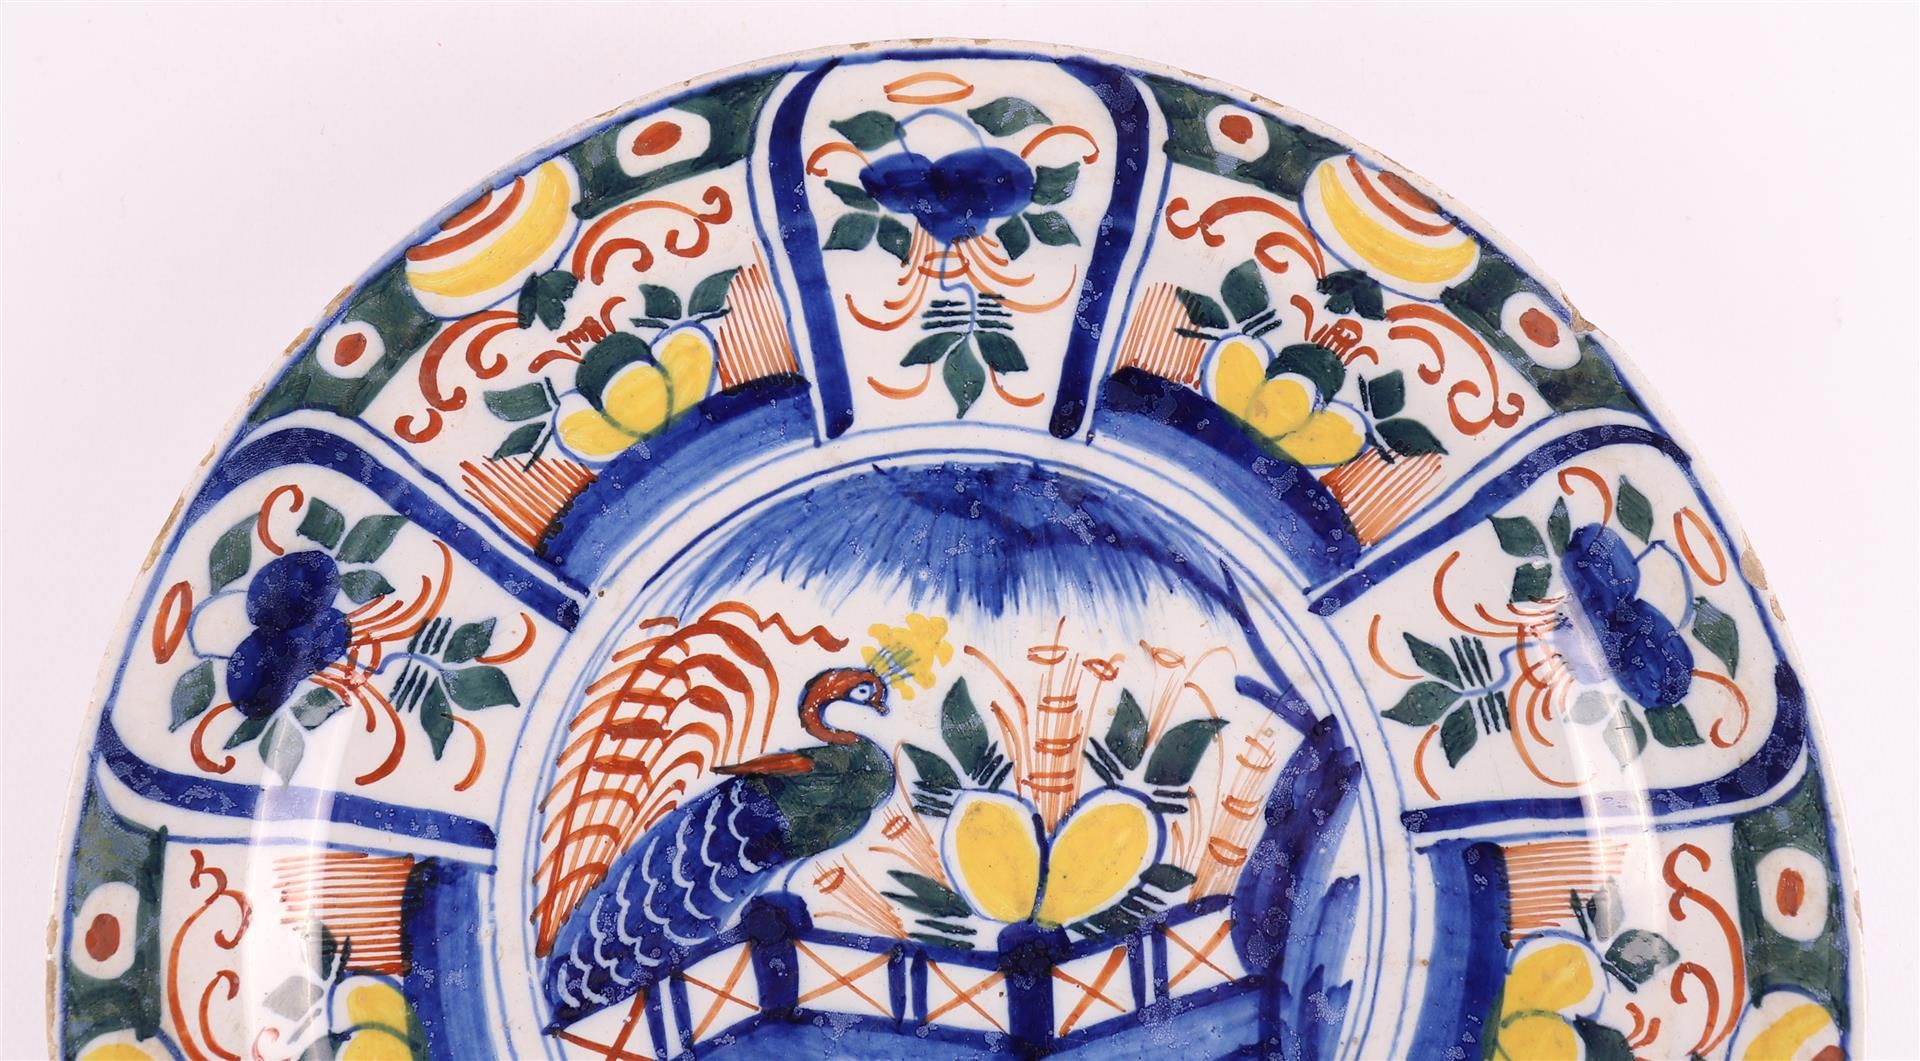 A polychrome Delft earthenware dish, 18th century. - Image 3 of 9